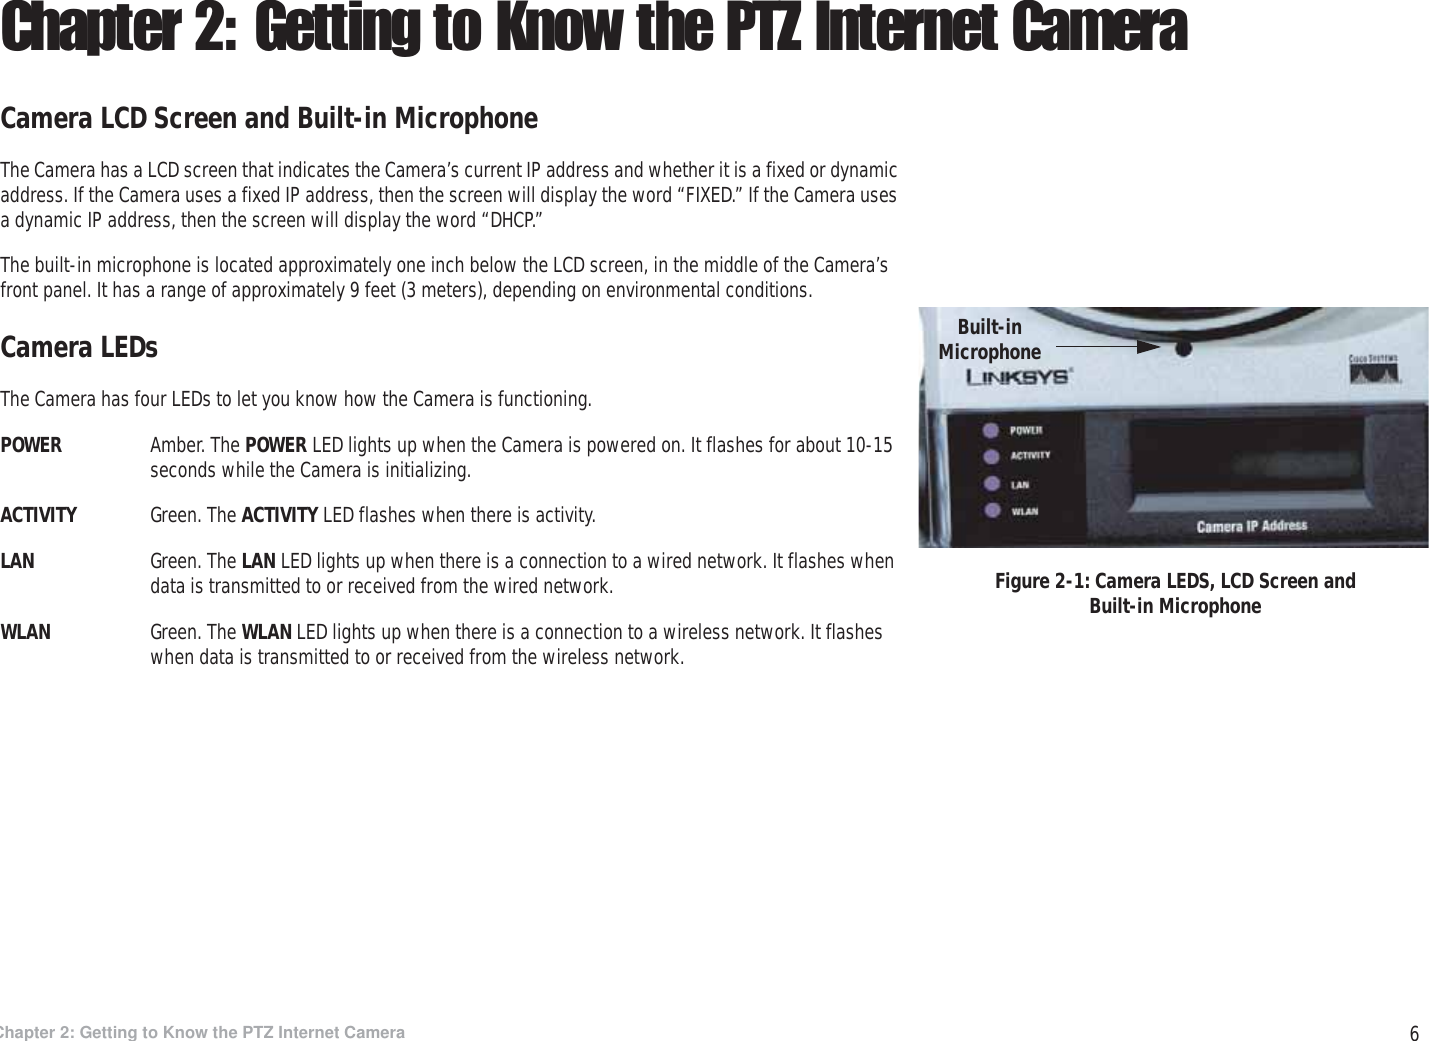 6Chapter 2: Getting to Know the PTZ Internet CameraCamera LCD Screen and Built-in MicrophoneWireless-G PTZ Internet Camera with AudioChapter 2: Getting to Know the PTZ Internet CameraCamera LCD Screen and Built-in MicrophoneThe Camera has a LCD screen that indicates the Camera’s current IP address and whether it is a fixed or dynamic address. If the Camera uses a fixed IP address, then the screen will display the word “FIXED.” If the Camera uses a dynamic IP address, then the screen will display the word “DHCP.” The built-in microphone is located approximately one inch below the LCD screen, in the middle of the Camera’s front panel. It has a range of approximately 9 feet (3 meters), depending on environmental conditions.Camera LEDsThe Camera has four LEDs to let you know how the Camera is functioning.POWER Amber. The POWER LED lights up when the Camera is powered on. It flashes for about 10-15 seconds while the Camera is initializing.ACTIVITY Green. The ACTIVITY LED flashes when there is activity.LAN Green. The LAN LED lights up when there is a connection to a wired network. It flashes when data is transmitted to or received from the wired network.WLAN Green. The WLAN LED lights up when there is a connection to a wireless network. It flashes when data is transmitted to or received from the wireless network.Figure 2-1: Camera LEDS, LCD Screen and Built-in MicrophoneBuilt-in Microphone